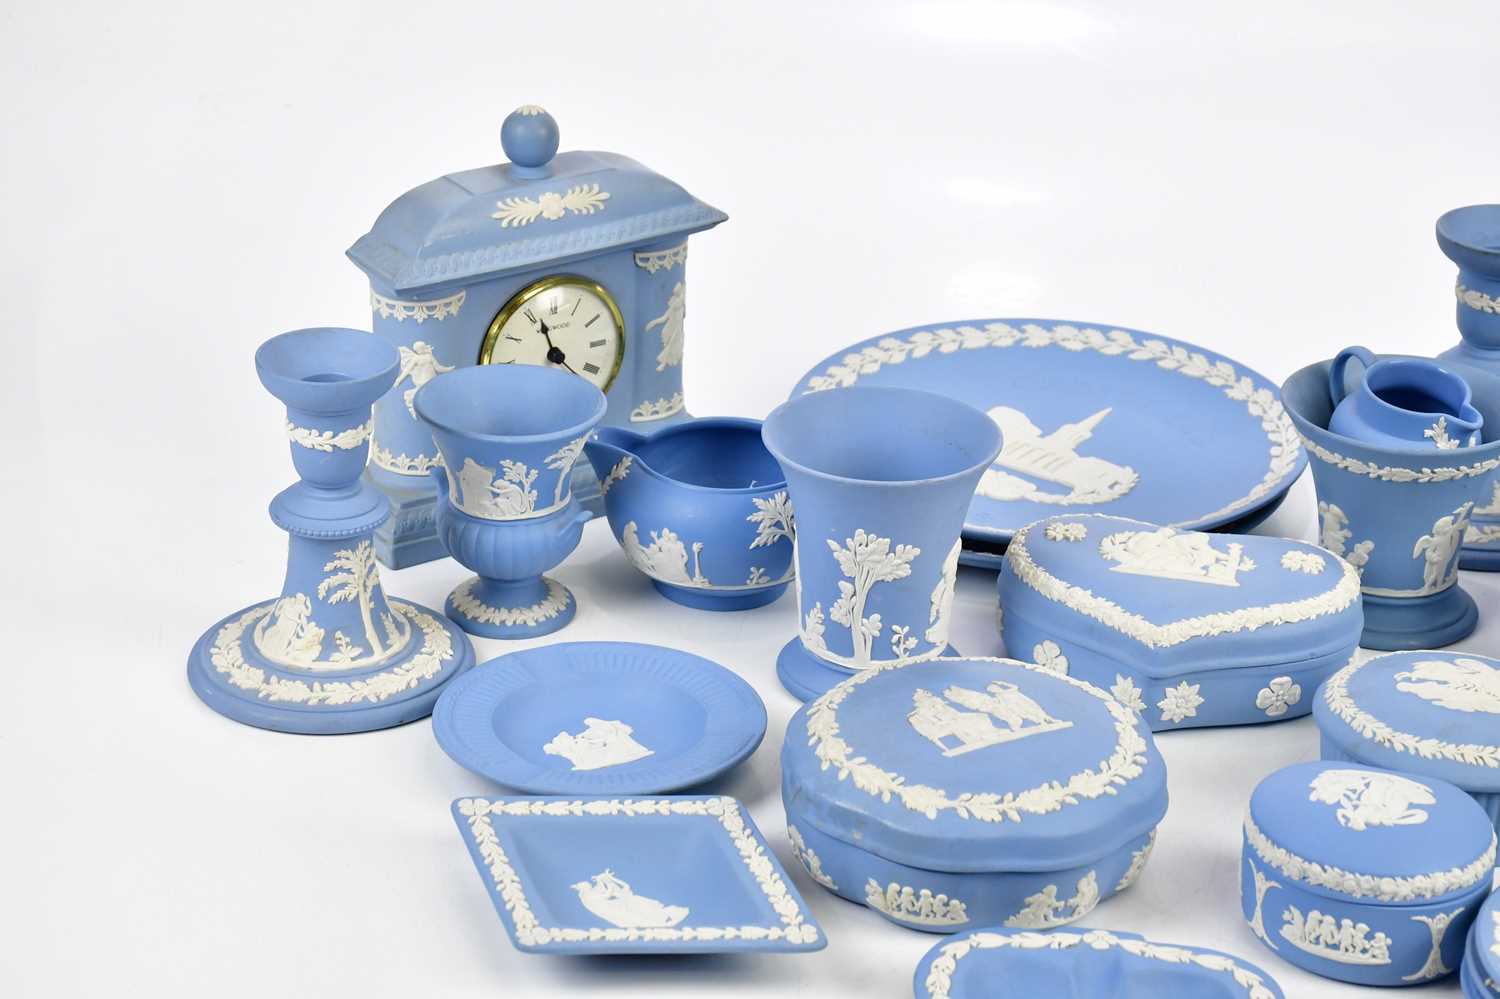 WEDGWOOD; a collection of jasperware including trinket boxes, clock, dishes, candlesticks, etc. - Image 2 of 5